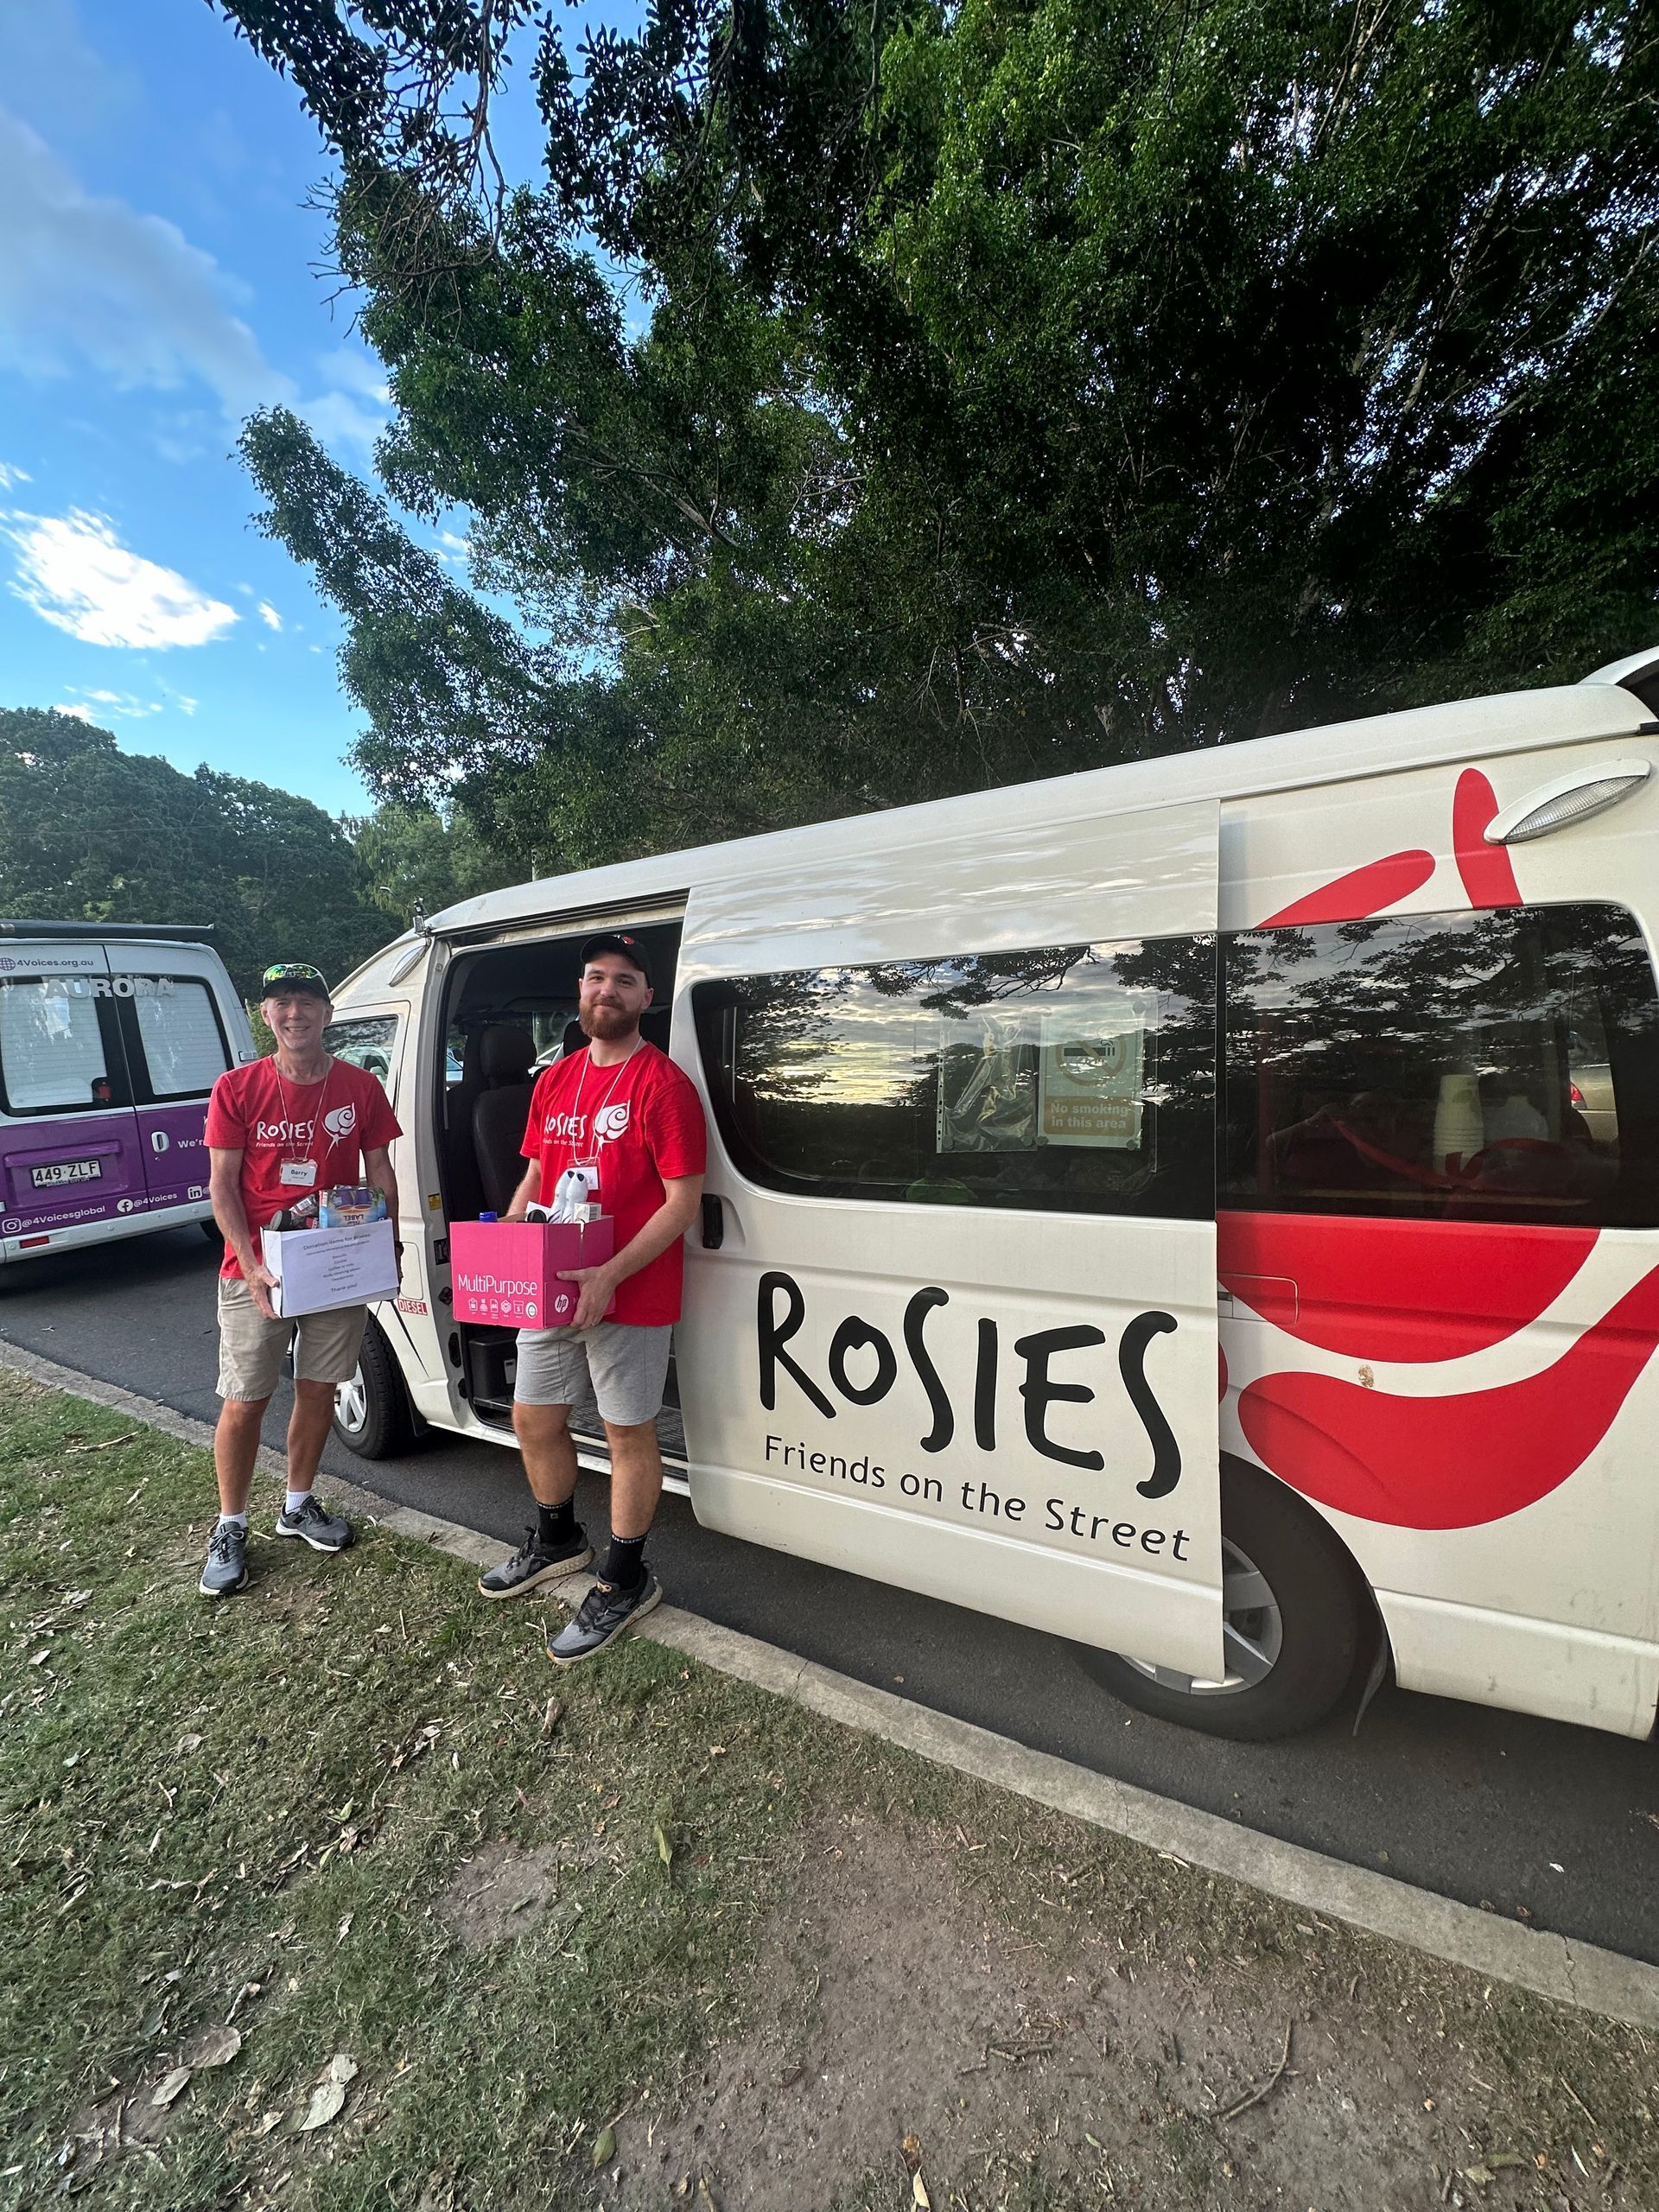 Two men are standing next to a white van that says rosies.